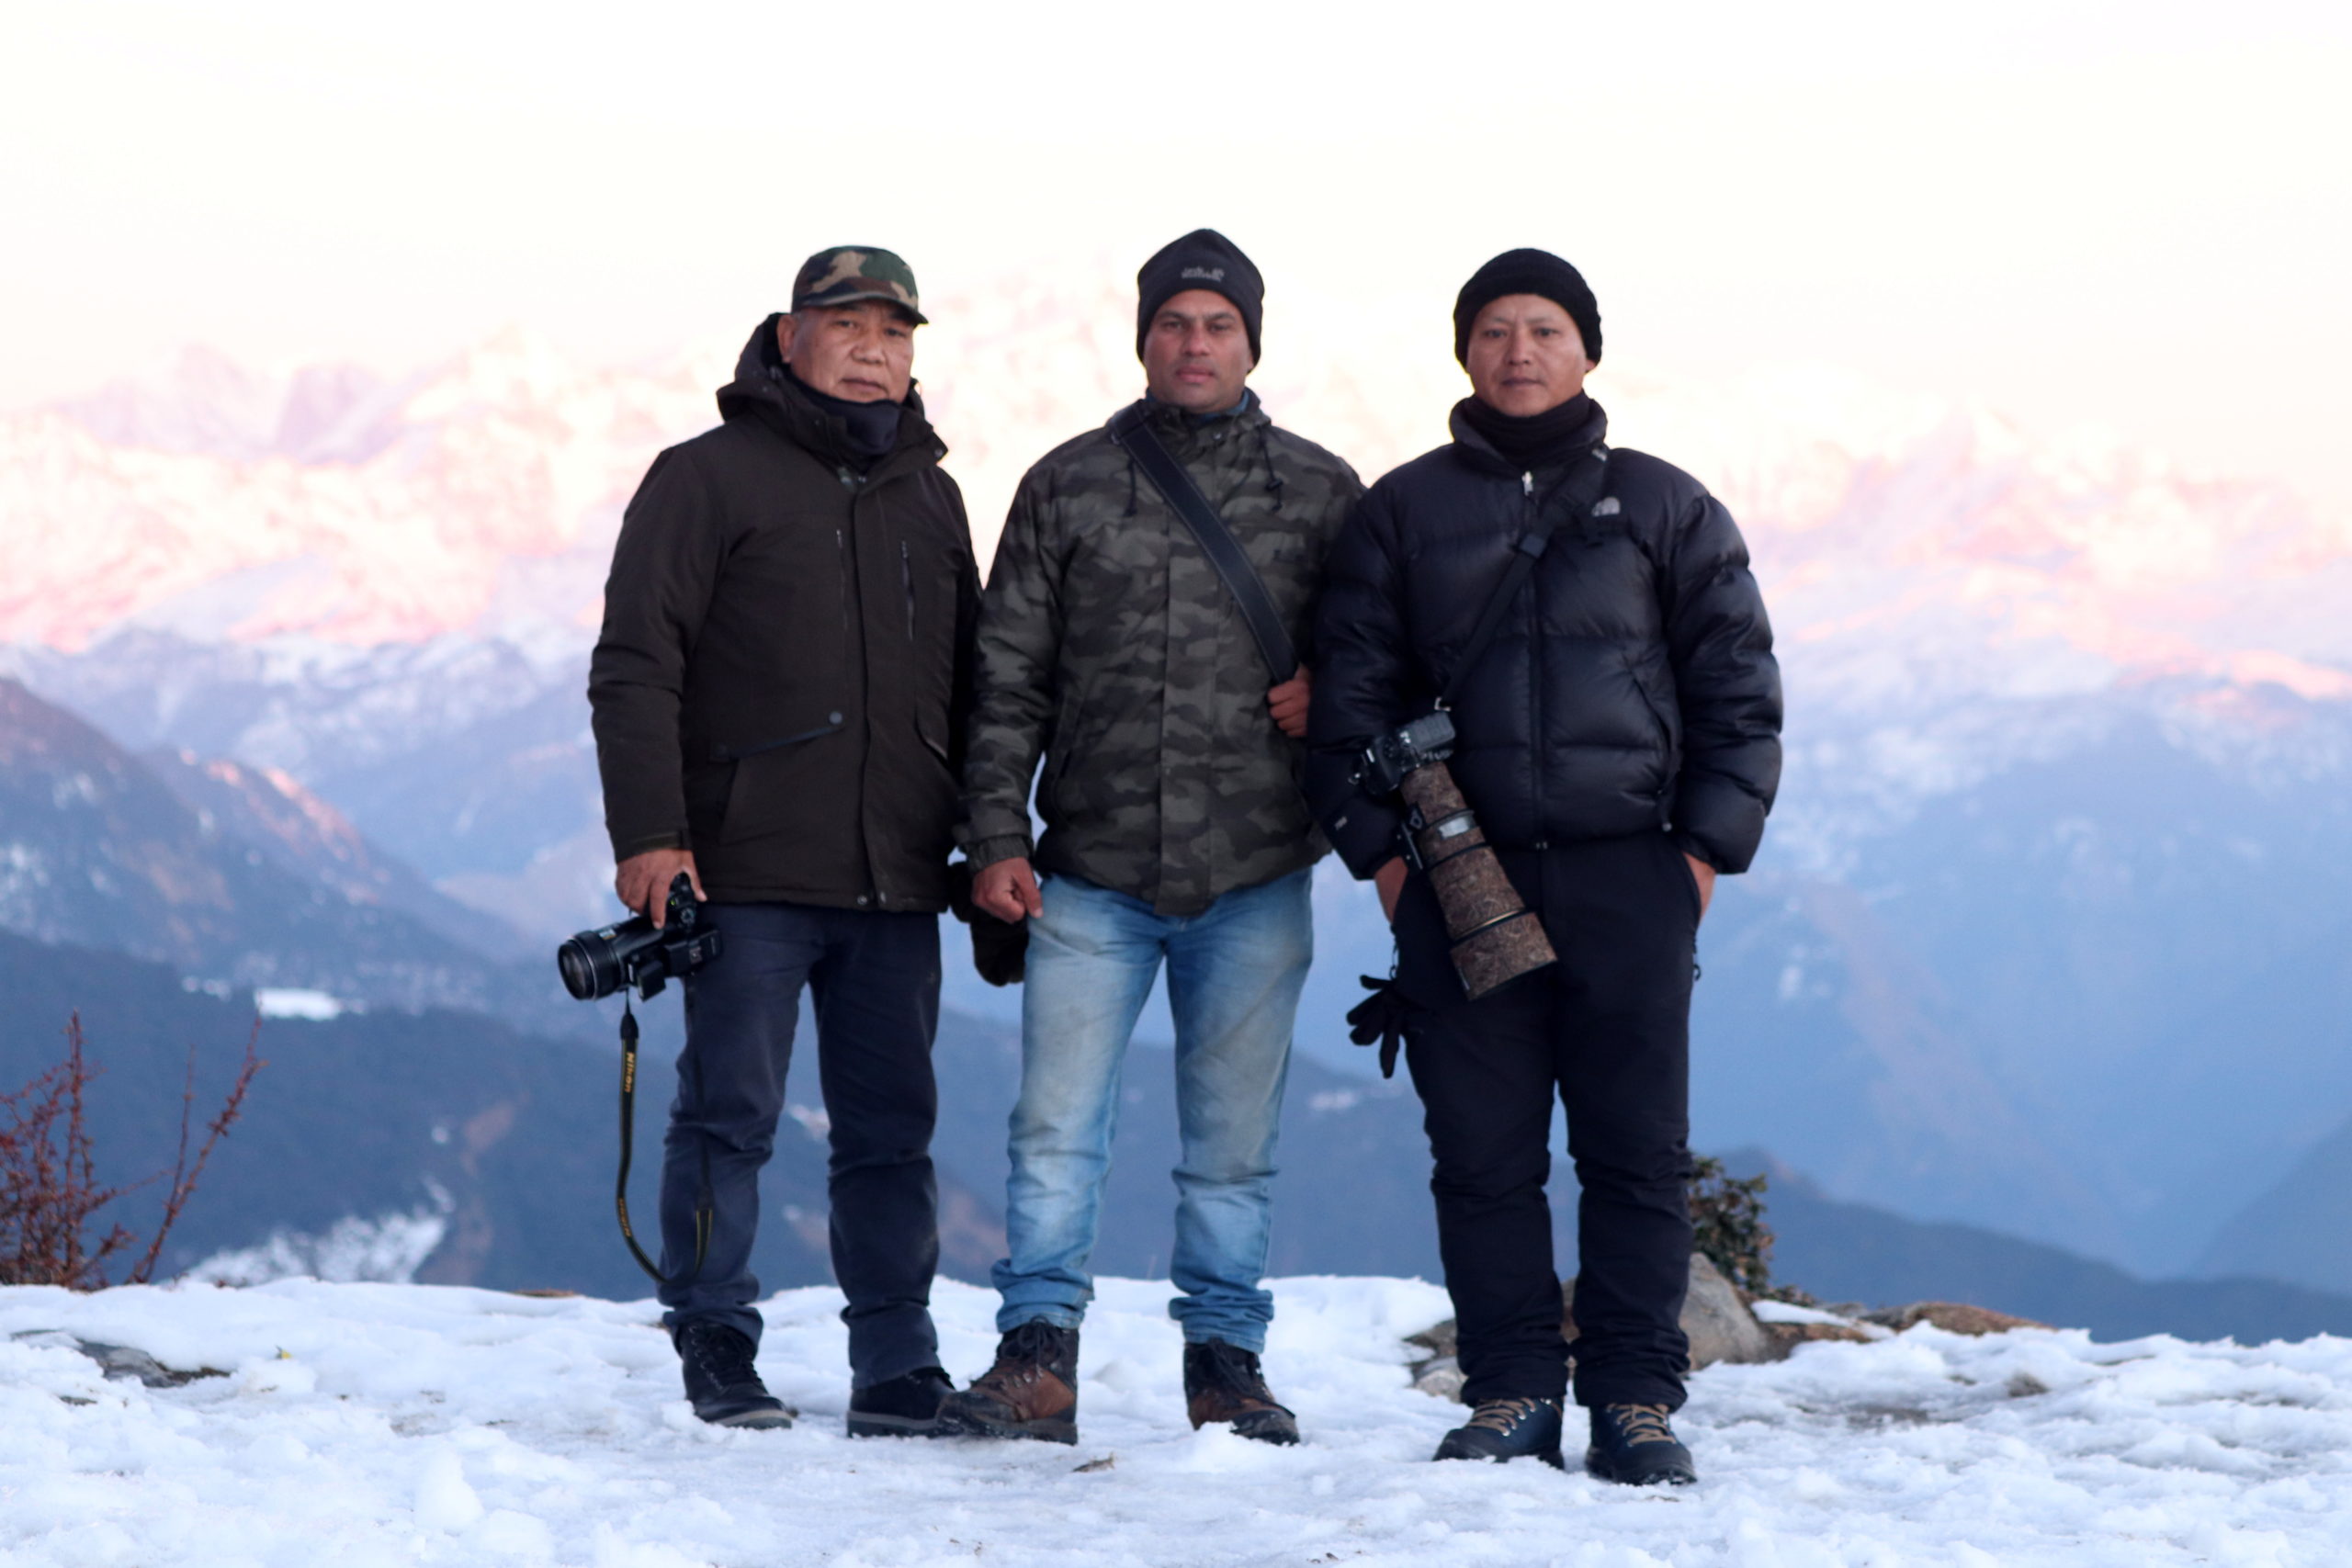 Bird watching with Birders - himalayas exploration Mr. Bharat Puspwan Guide Tour and Travel in Uttarakhand